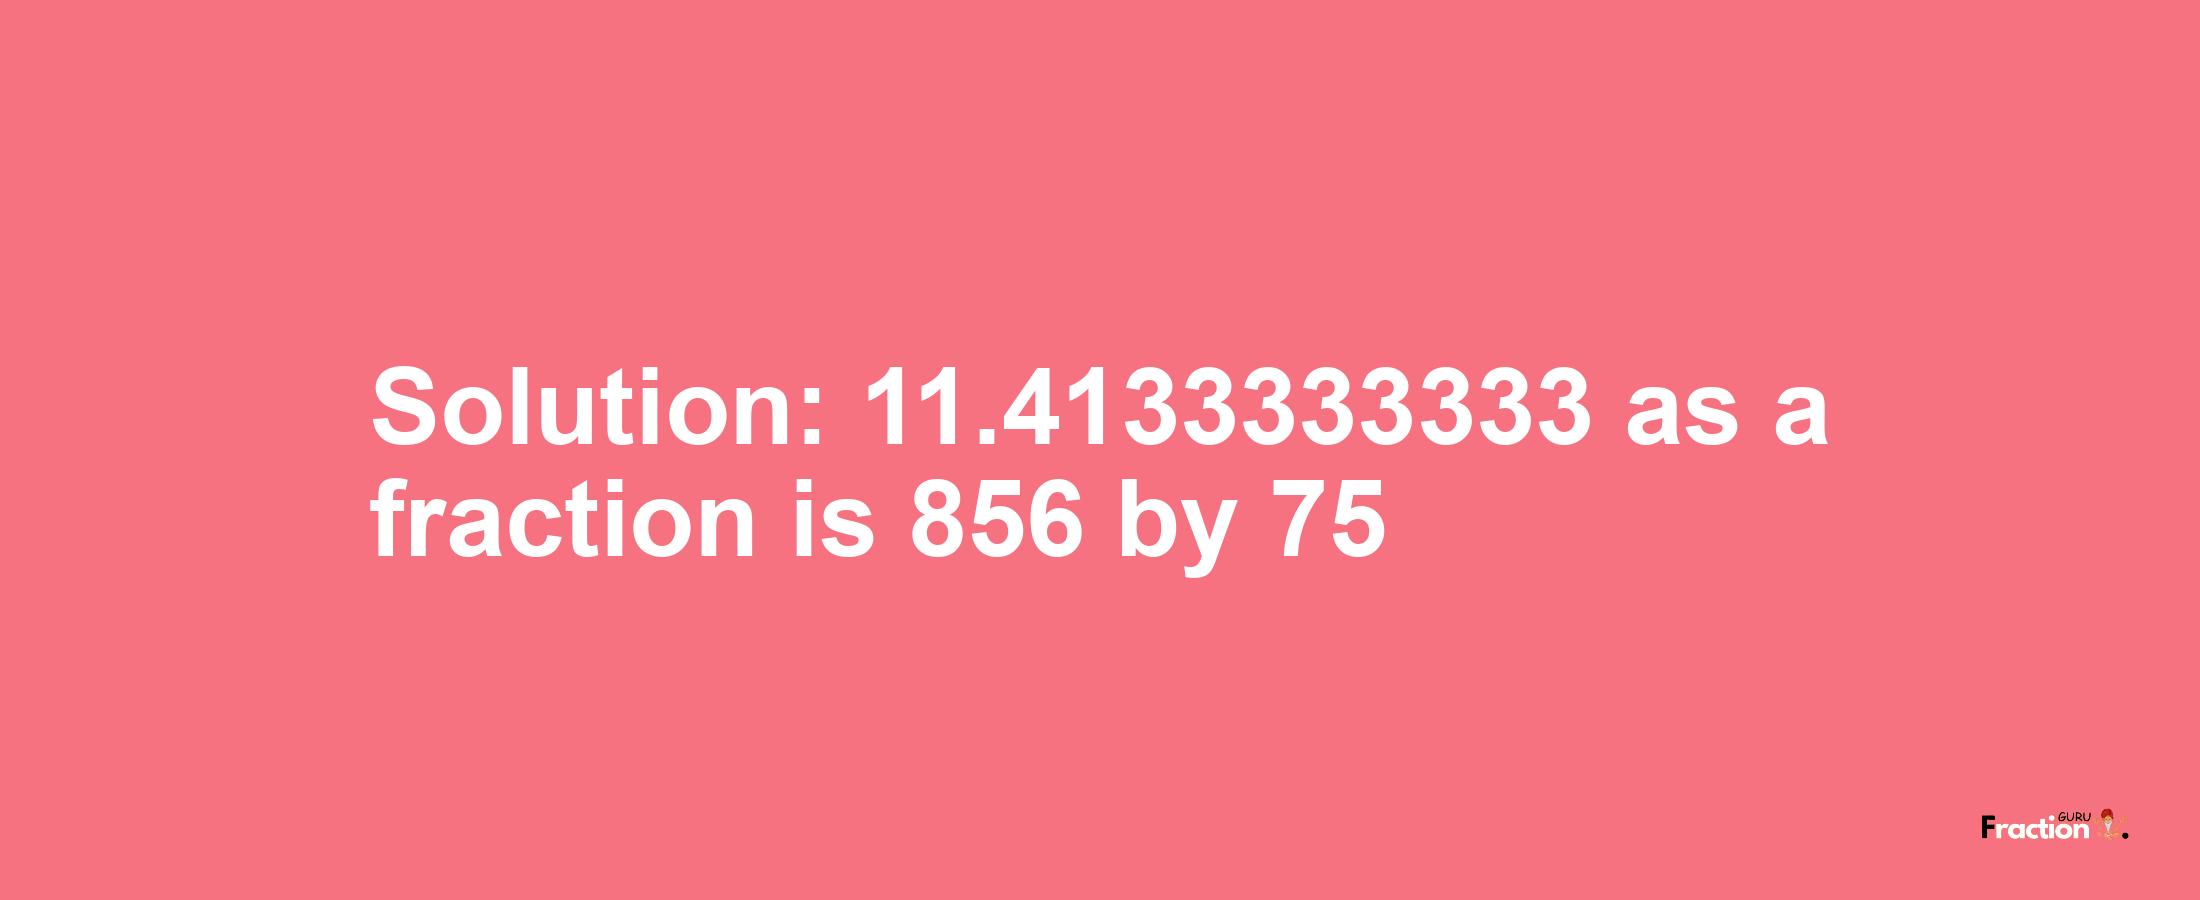 Solution:11.4133333333 as a fraction is 856/75